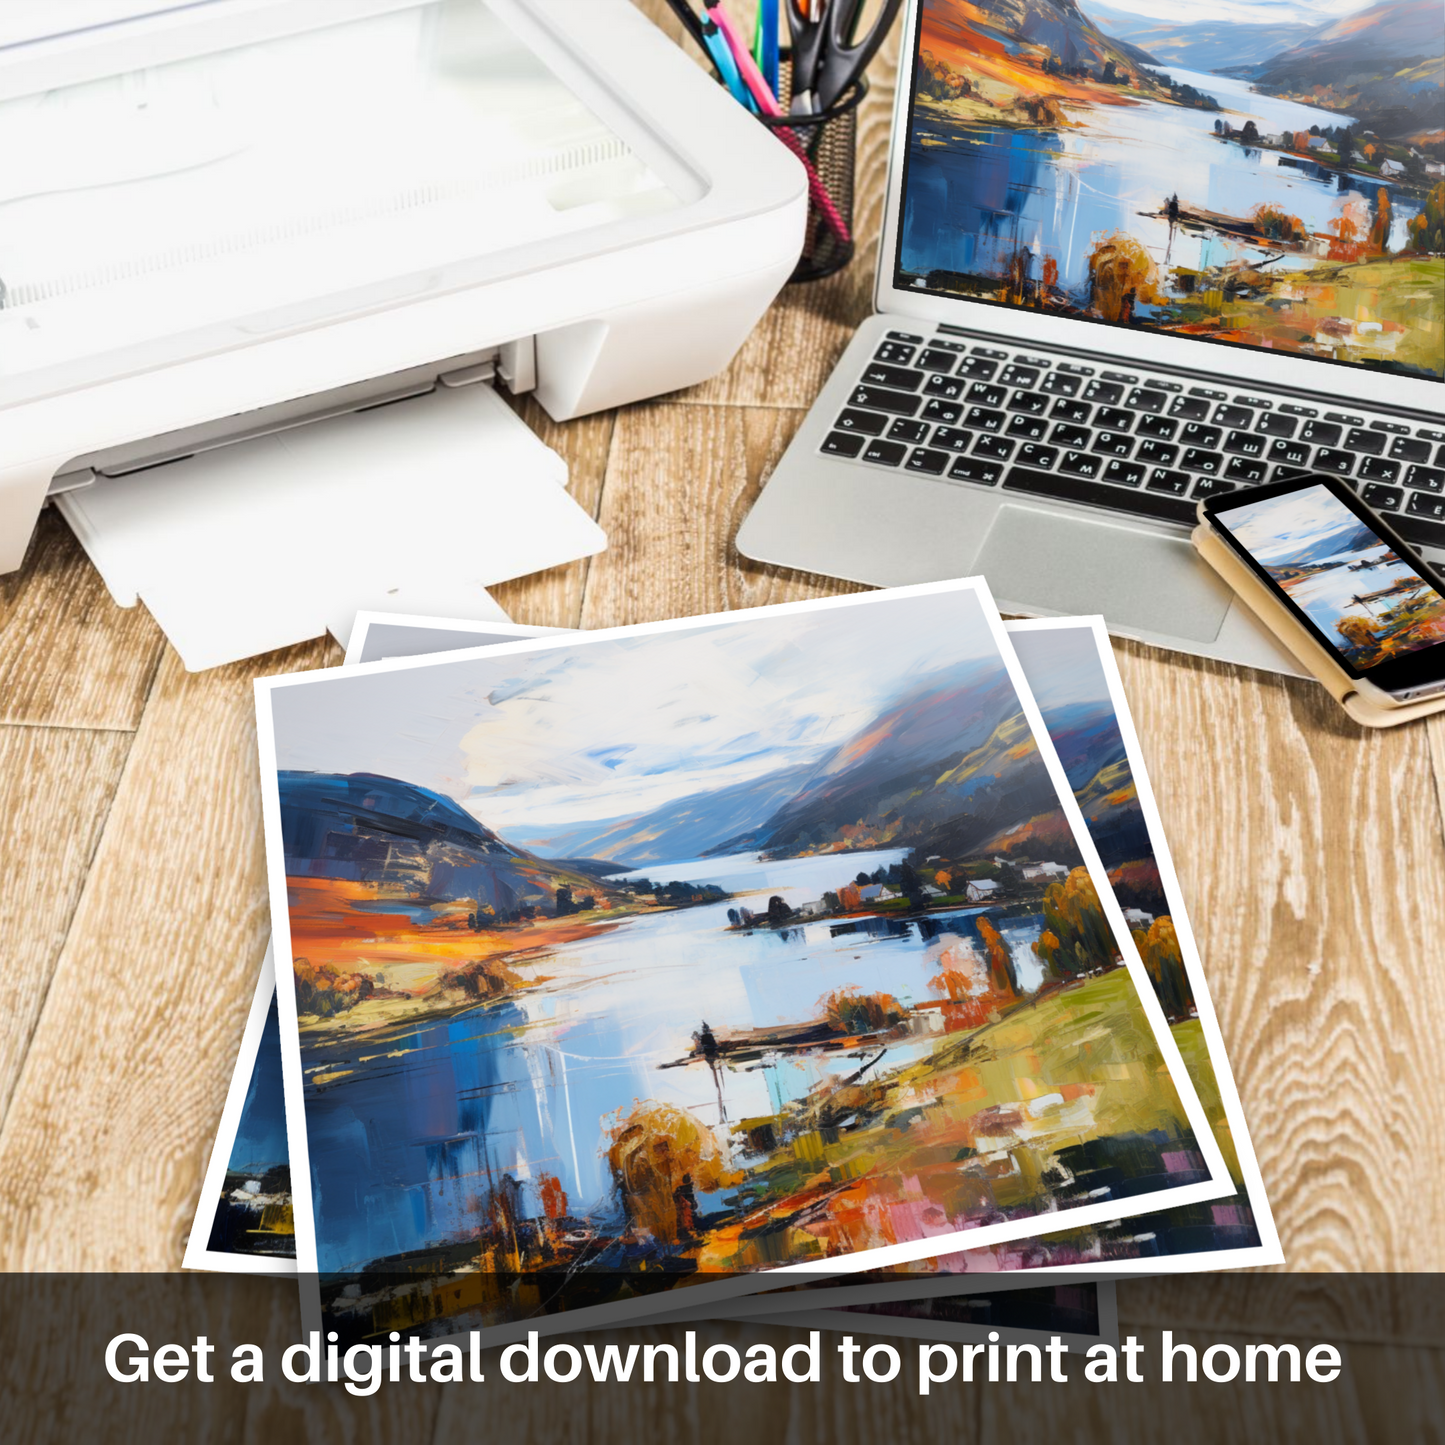 Downloadable and printable picture of Loch Earn, Perth and Kinross